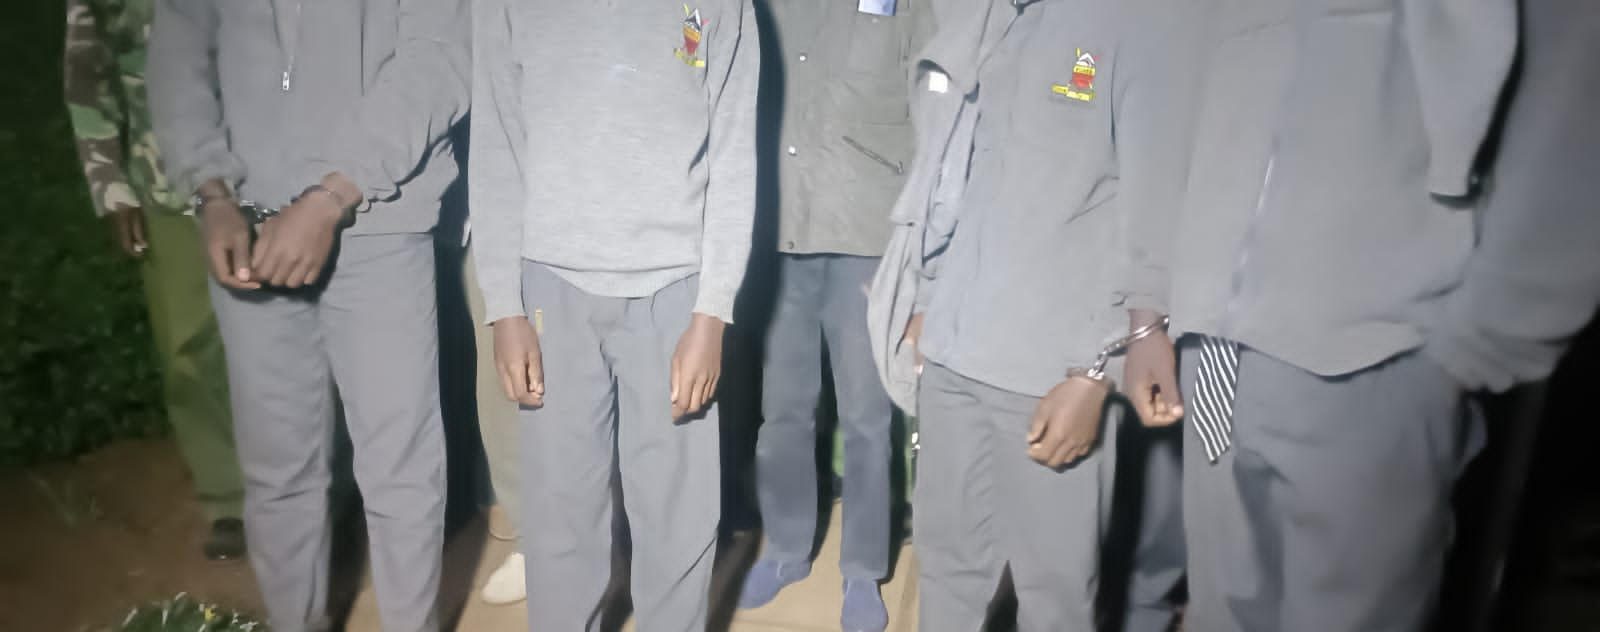 Four Kijabe Boys’ students arrested for allegedly setting dormitory aflame